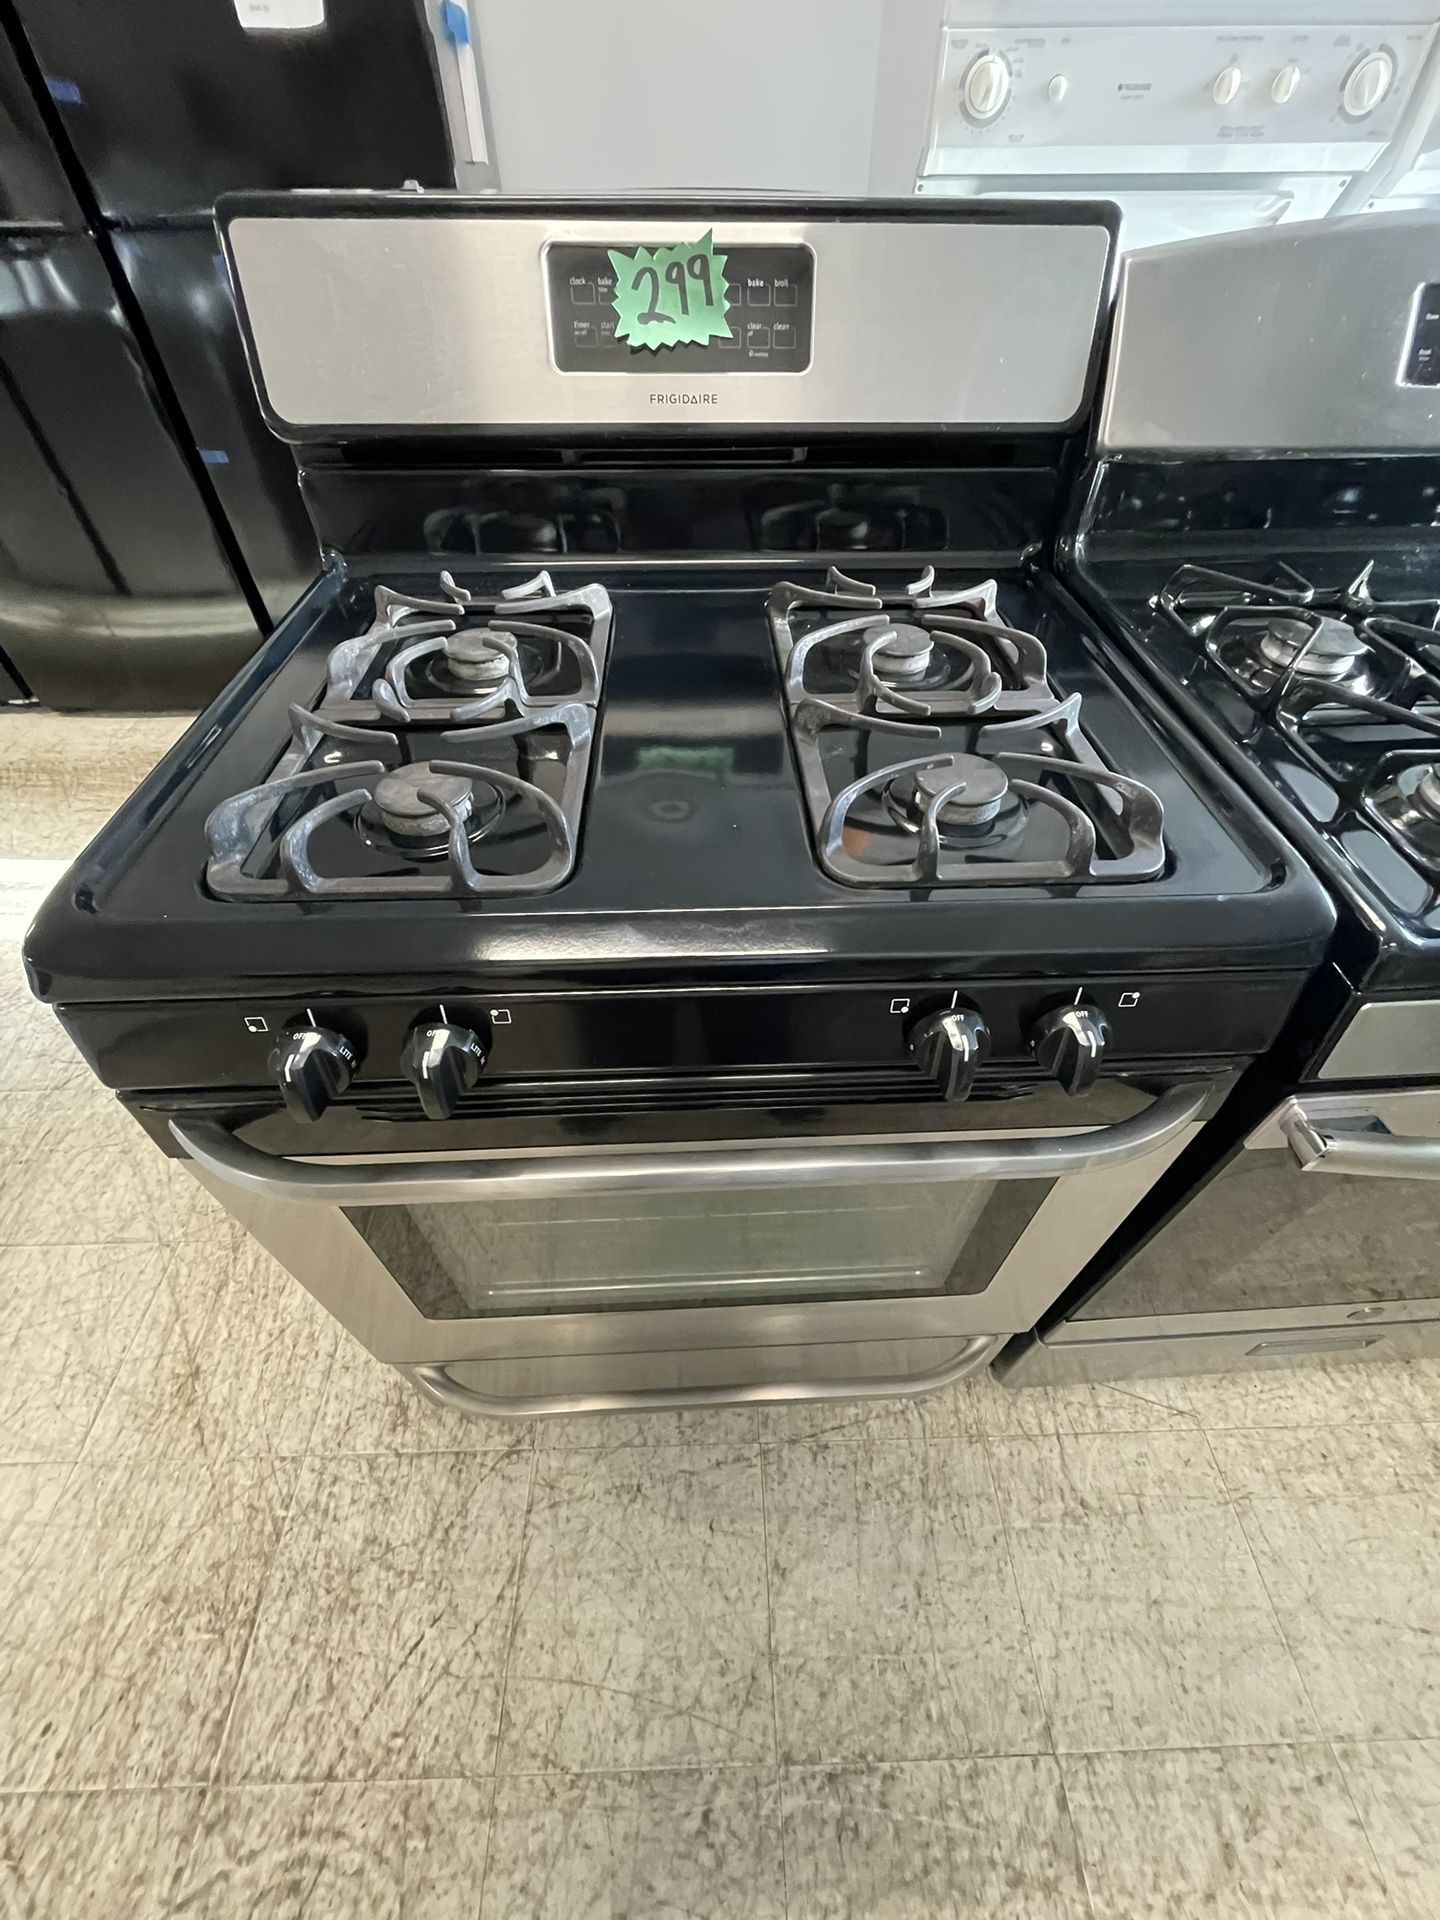 Frigidaire Gas Stove Used Good Condition With 90days Warranty 